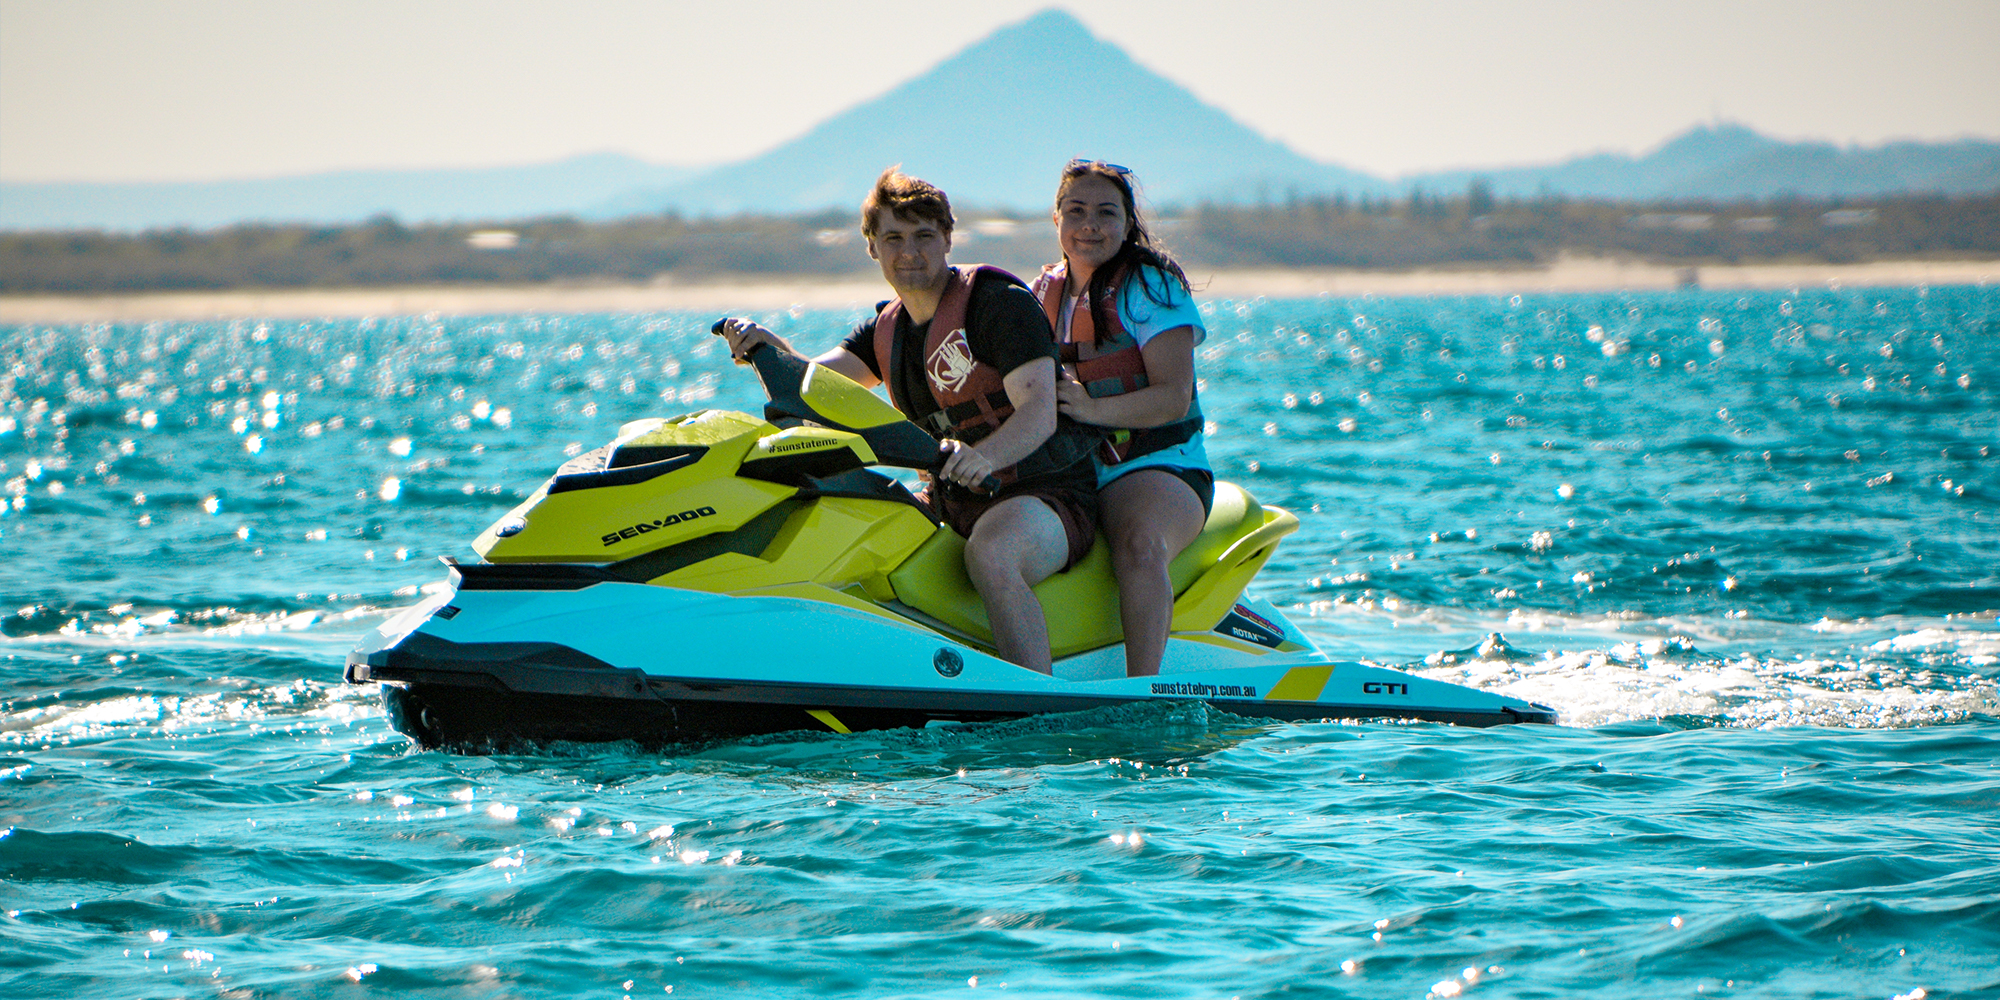 Get Wet and Wild - Jet Ski Hire for Fun